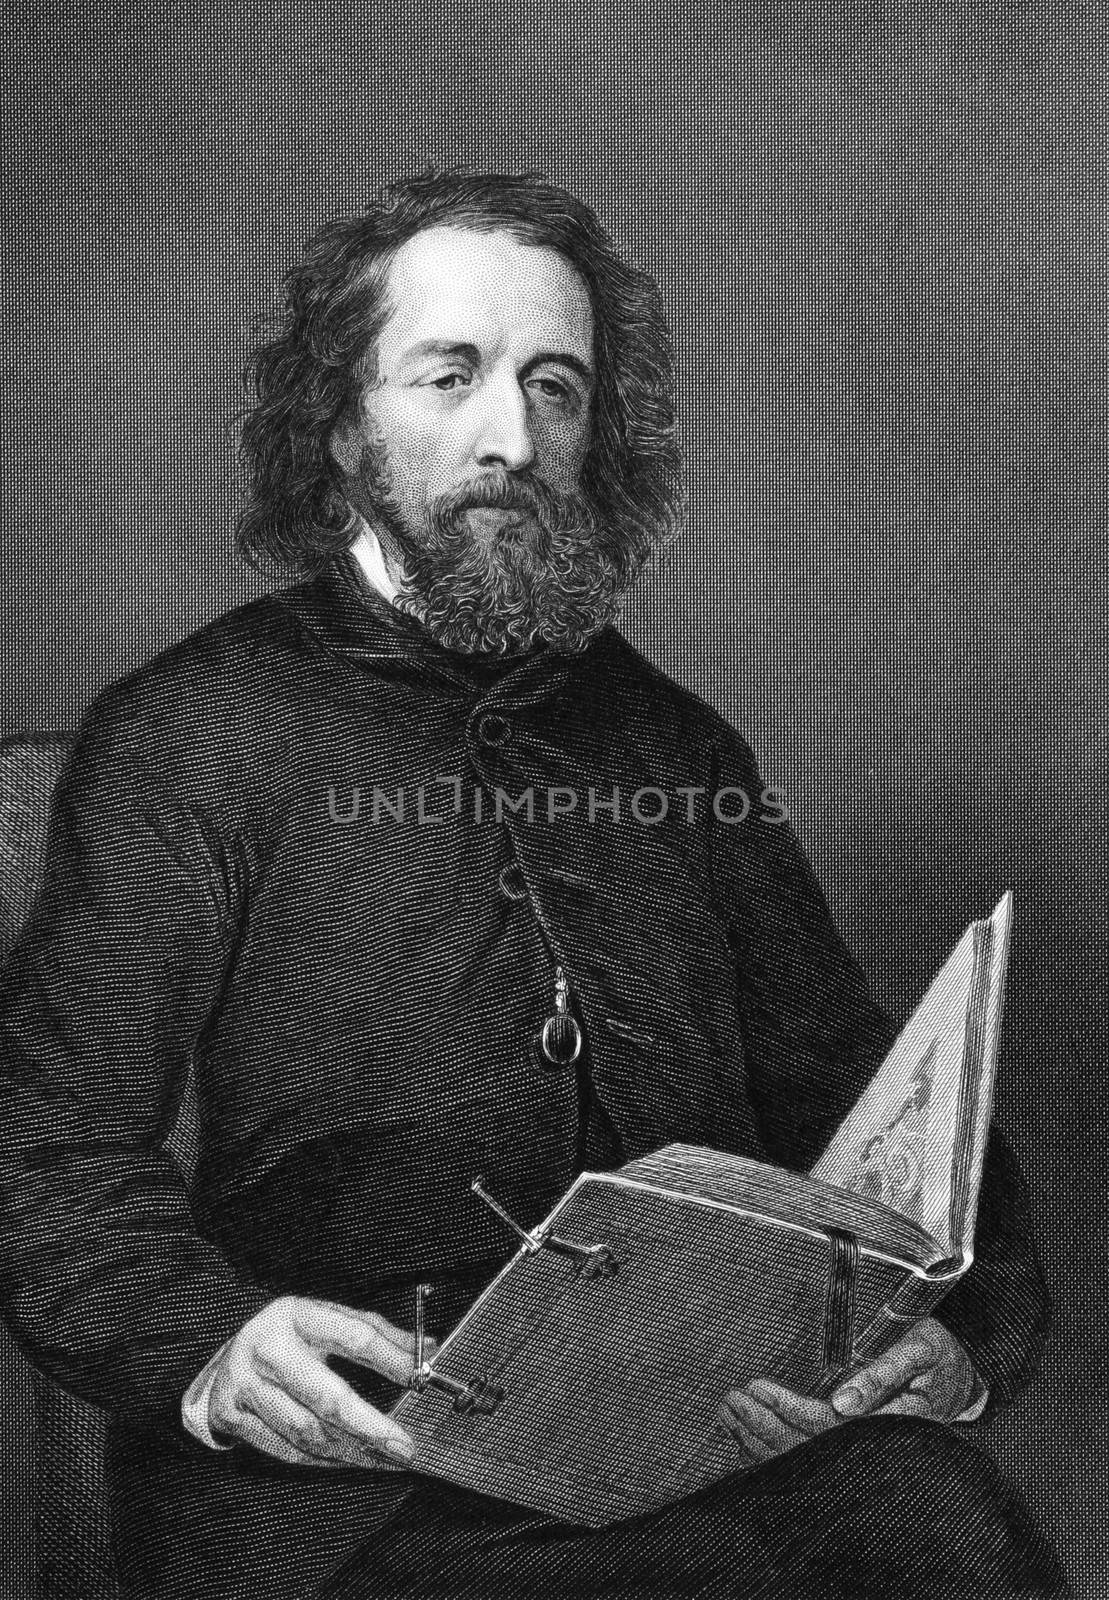 Alfred Lord Tennyson (1809-1892) on engraving from 1872. Poet Laureate of Great Britain and Ireland during Queen Victoria's reign. One of the most popular British poets. Engraved after a painting by A.Chappel and published in "The Masterpiece Library of Short Stories'',USA,1872.